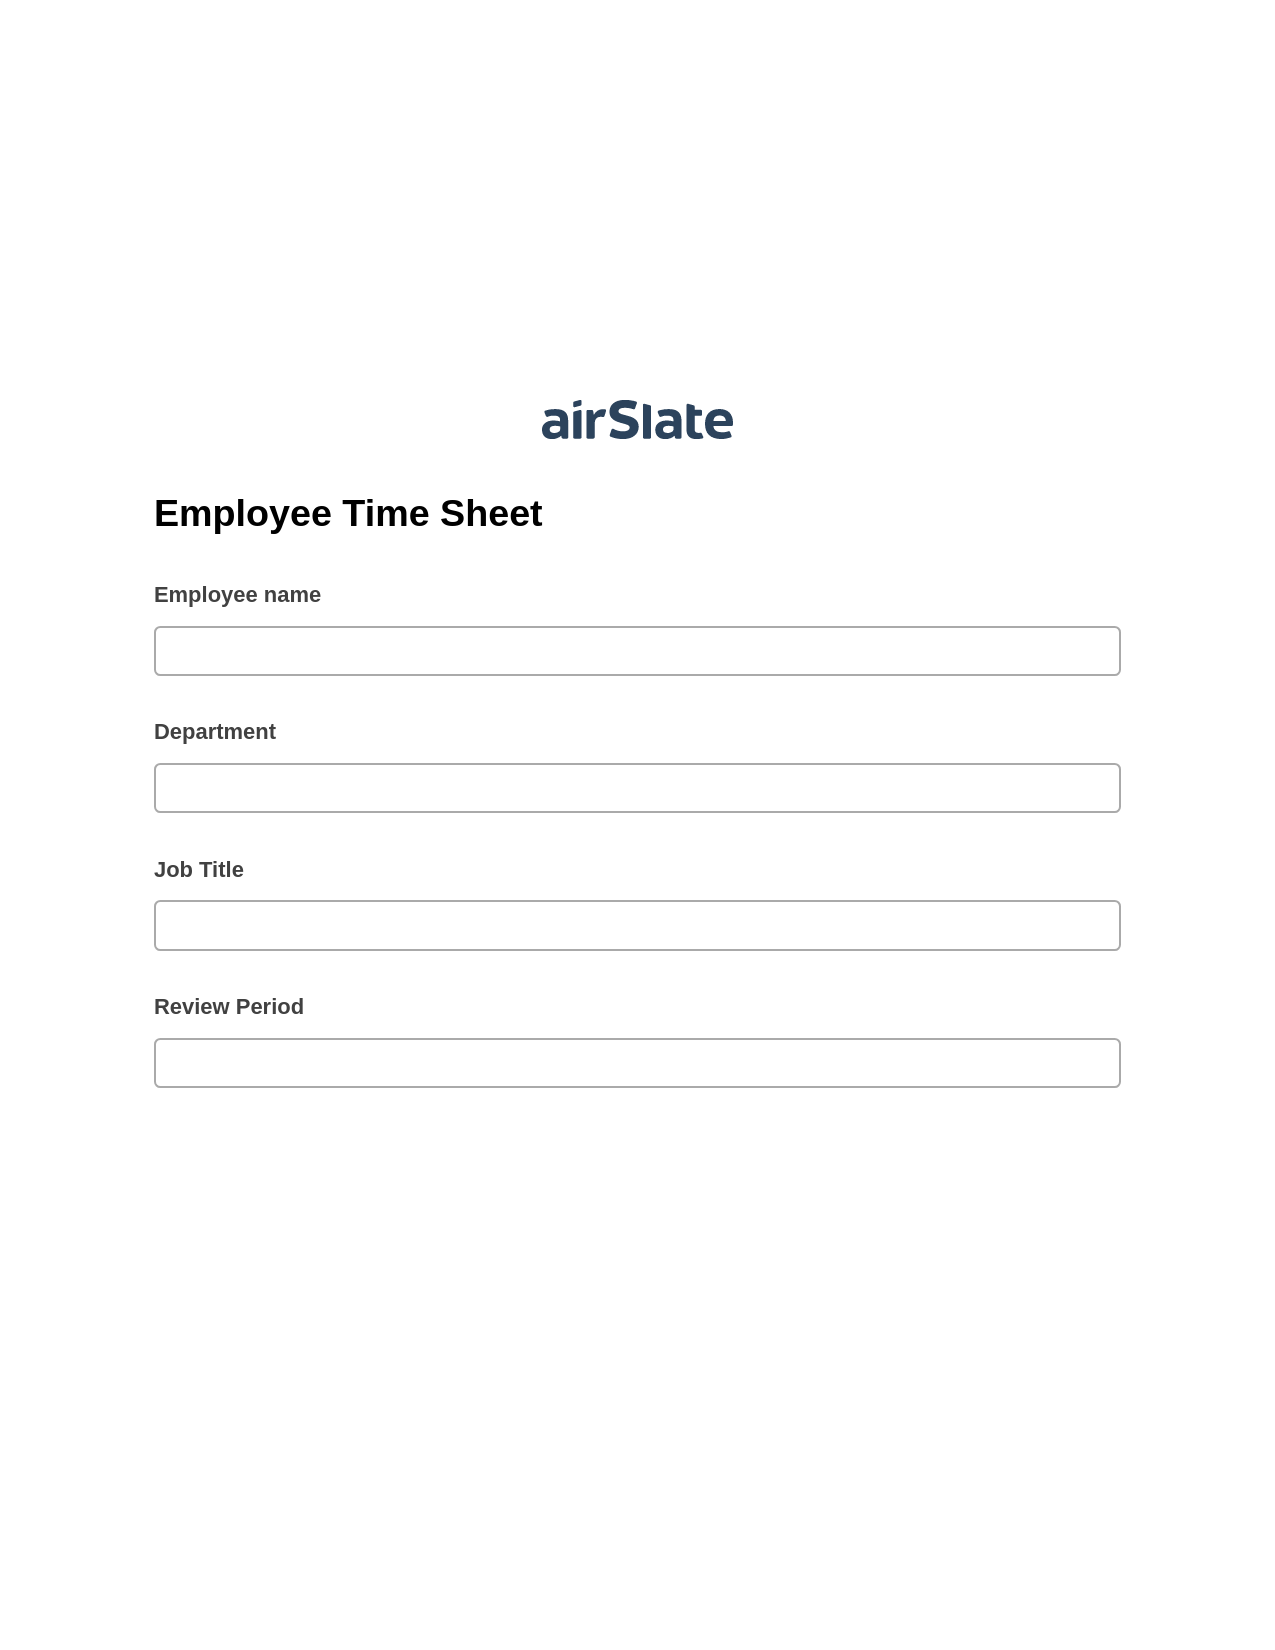 Employee Time Sheet Pre-fill Dropdowns from Google Sheet Bot, Create QuickBooks Invoice Bot, Archive to Dropbox Bot